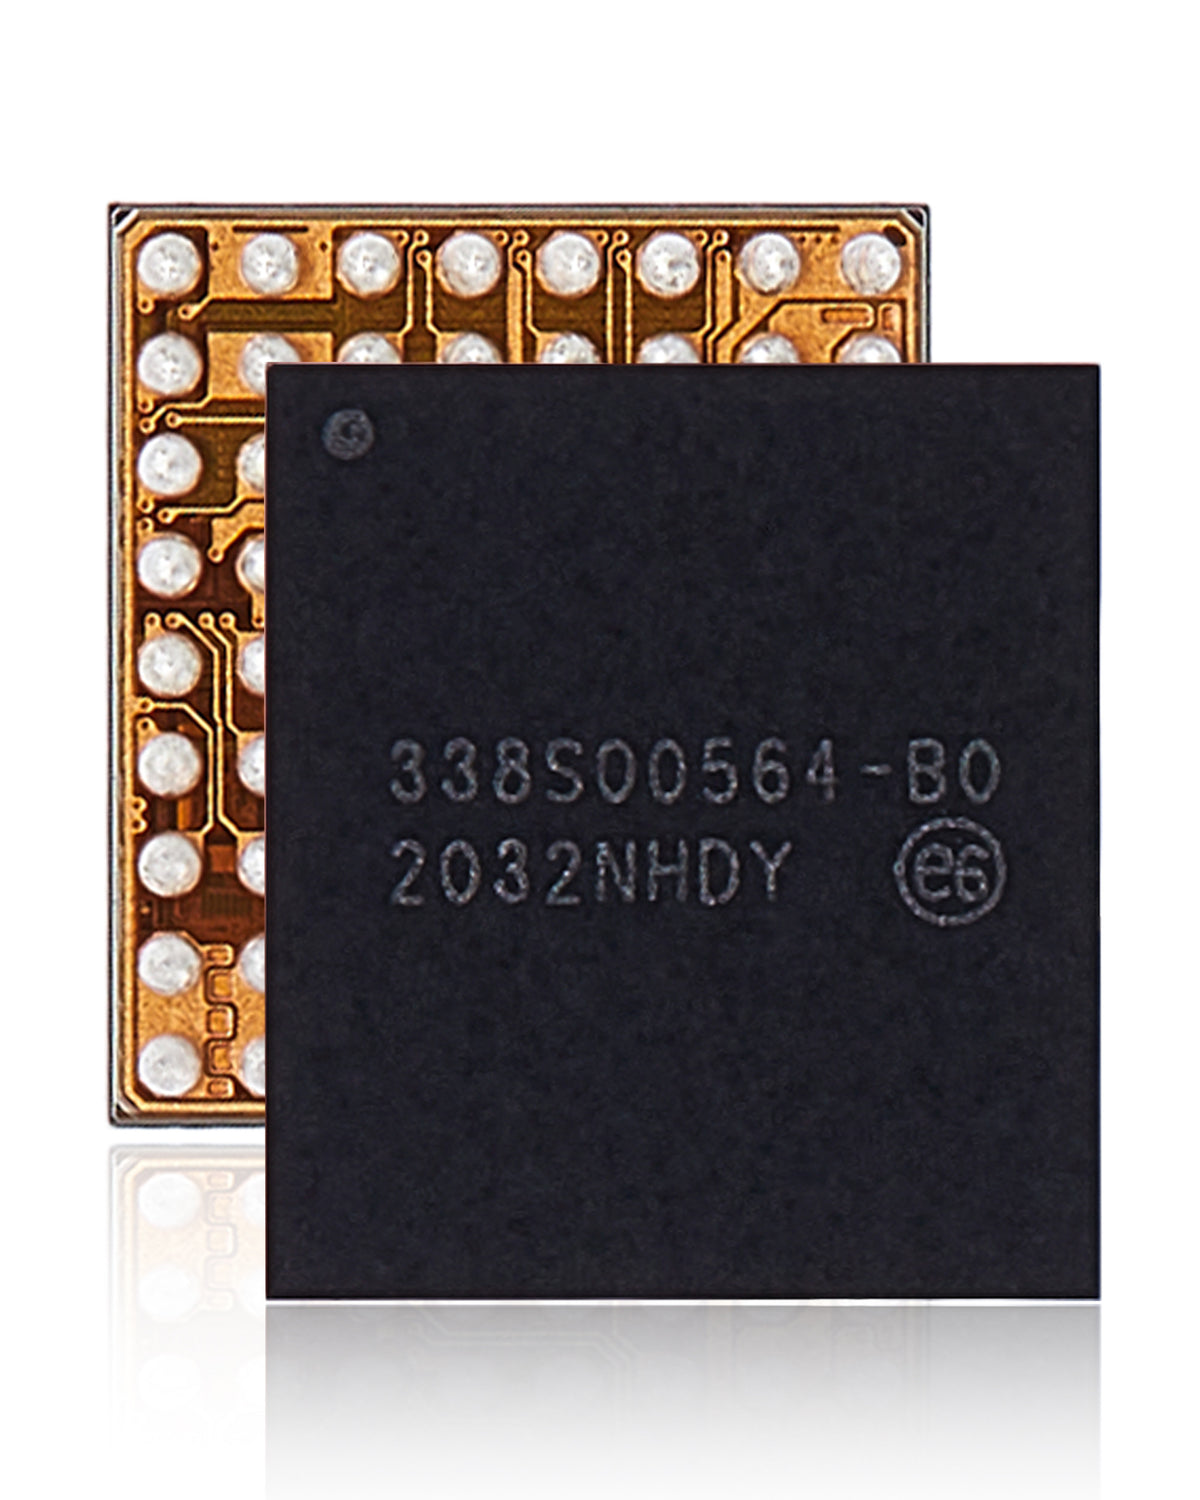 CAMERA IC CHIP COMPATIBLE WITH IPHONE 12 / 12 MINI / 12 PRO / 12 PRO MAX (338S00564)